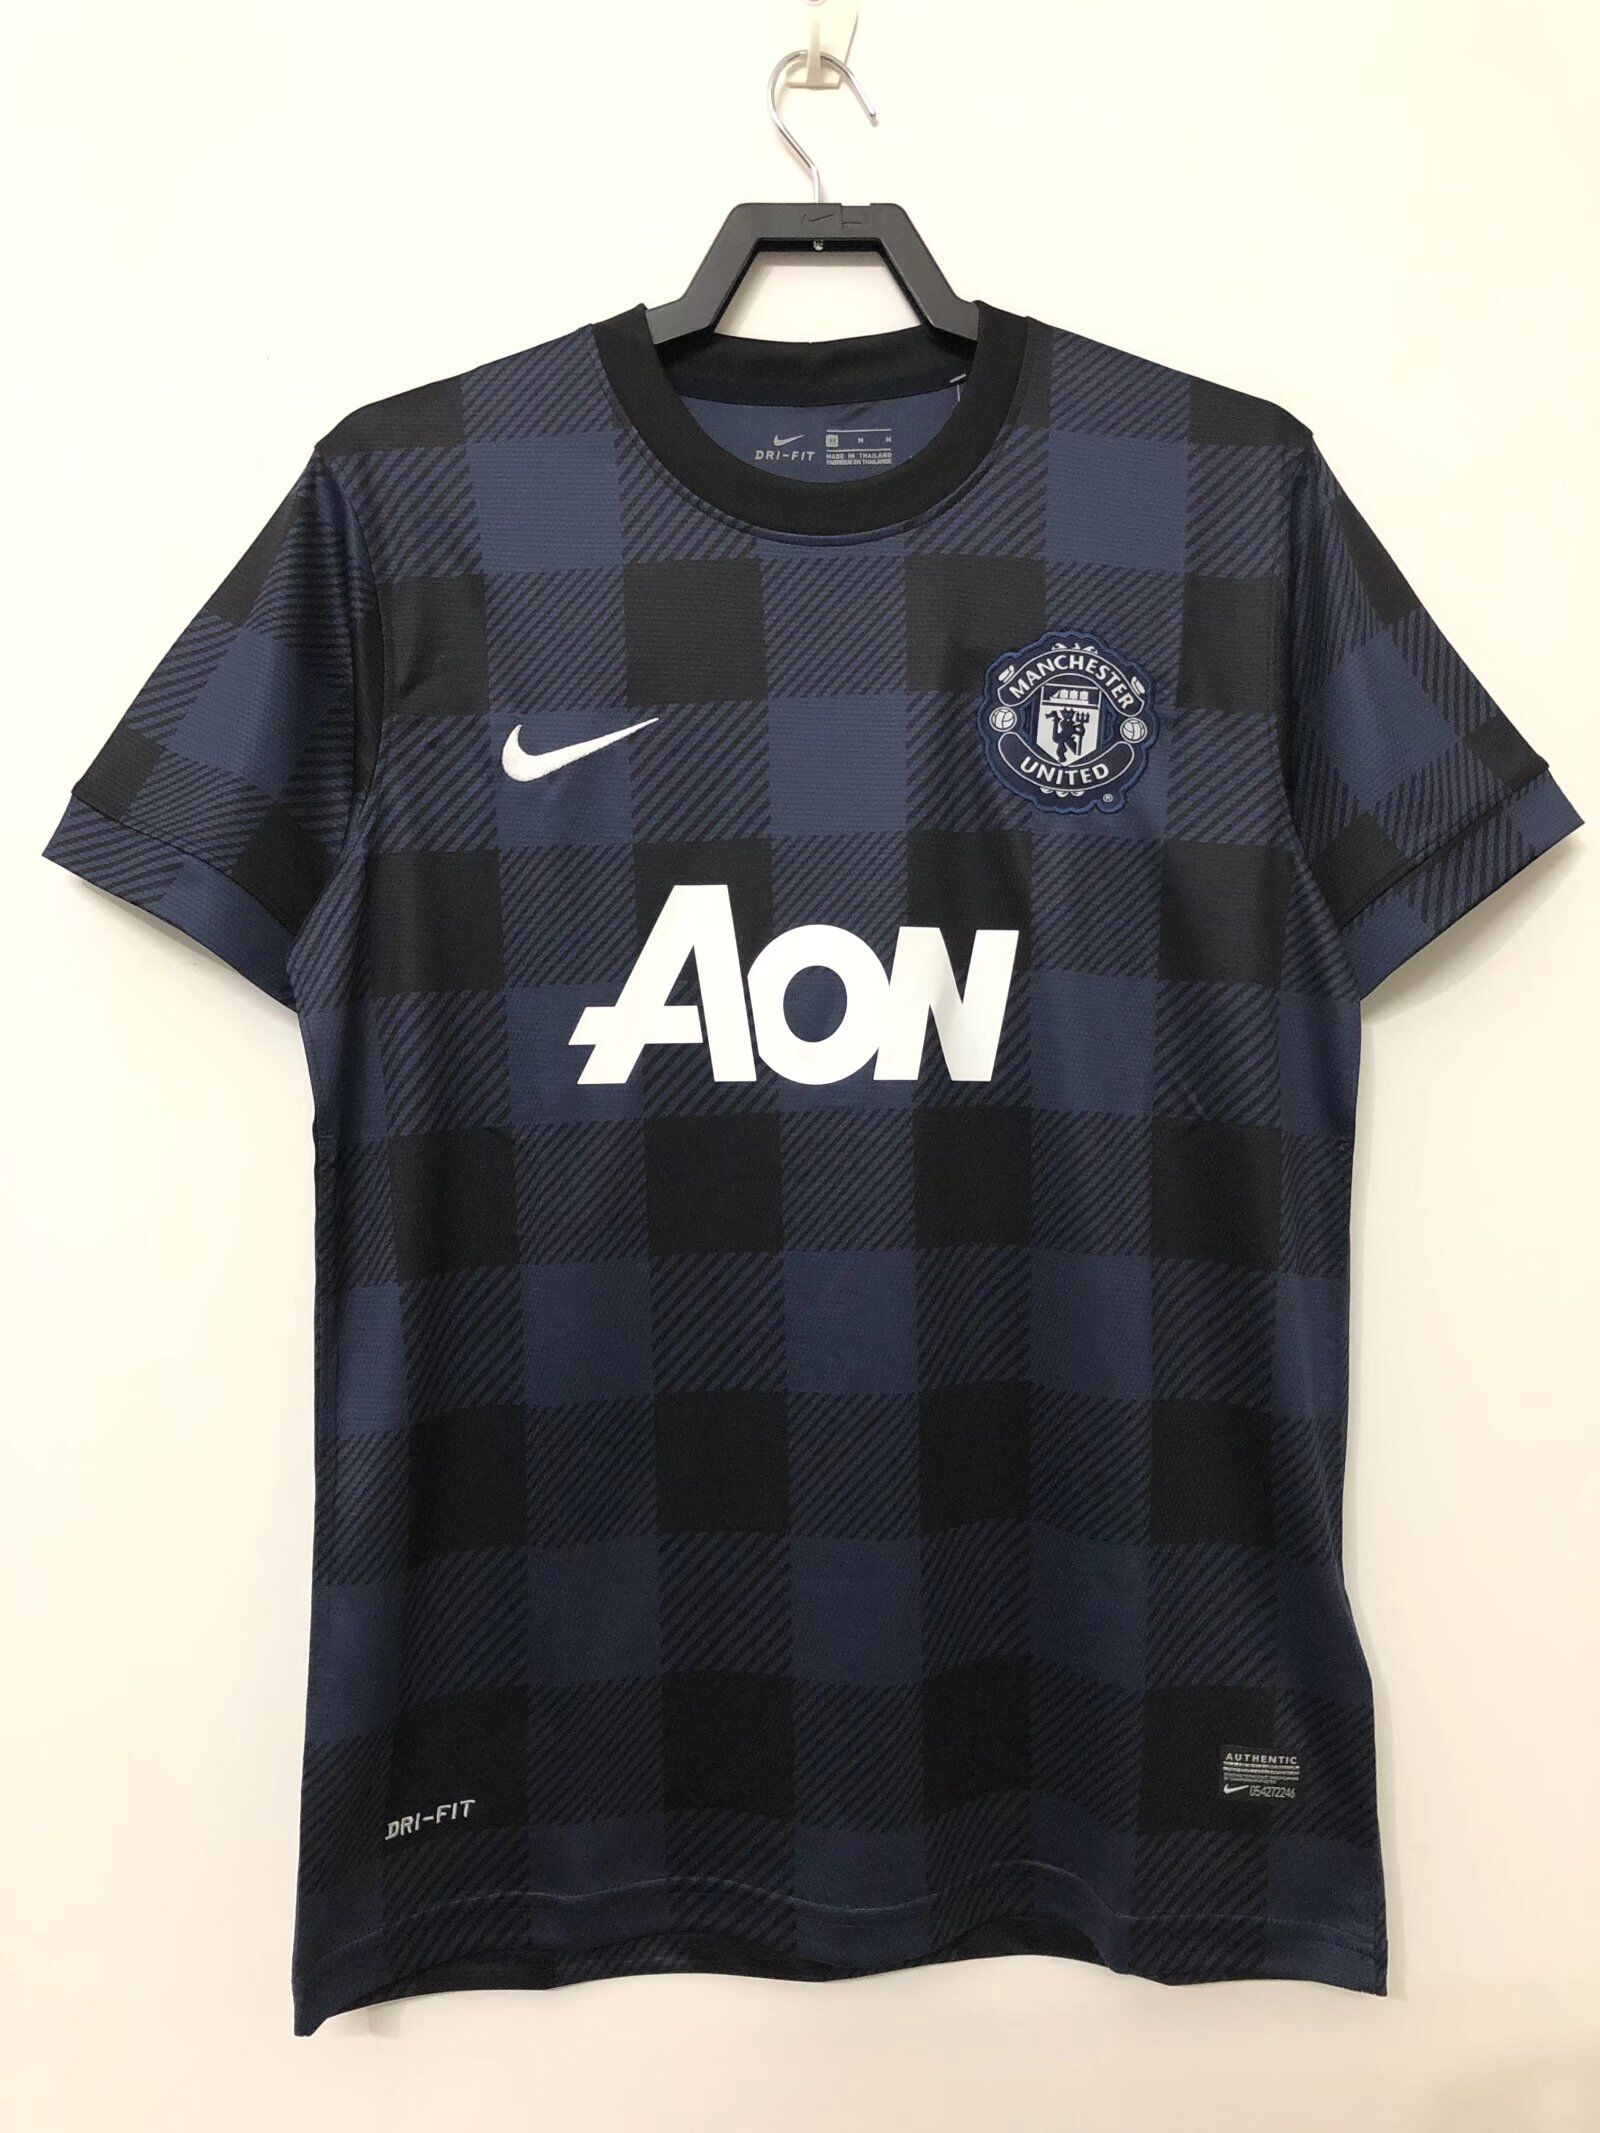 Retro 2013/14 Manchester United Away Soccer Jersey - soccerdeal